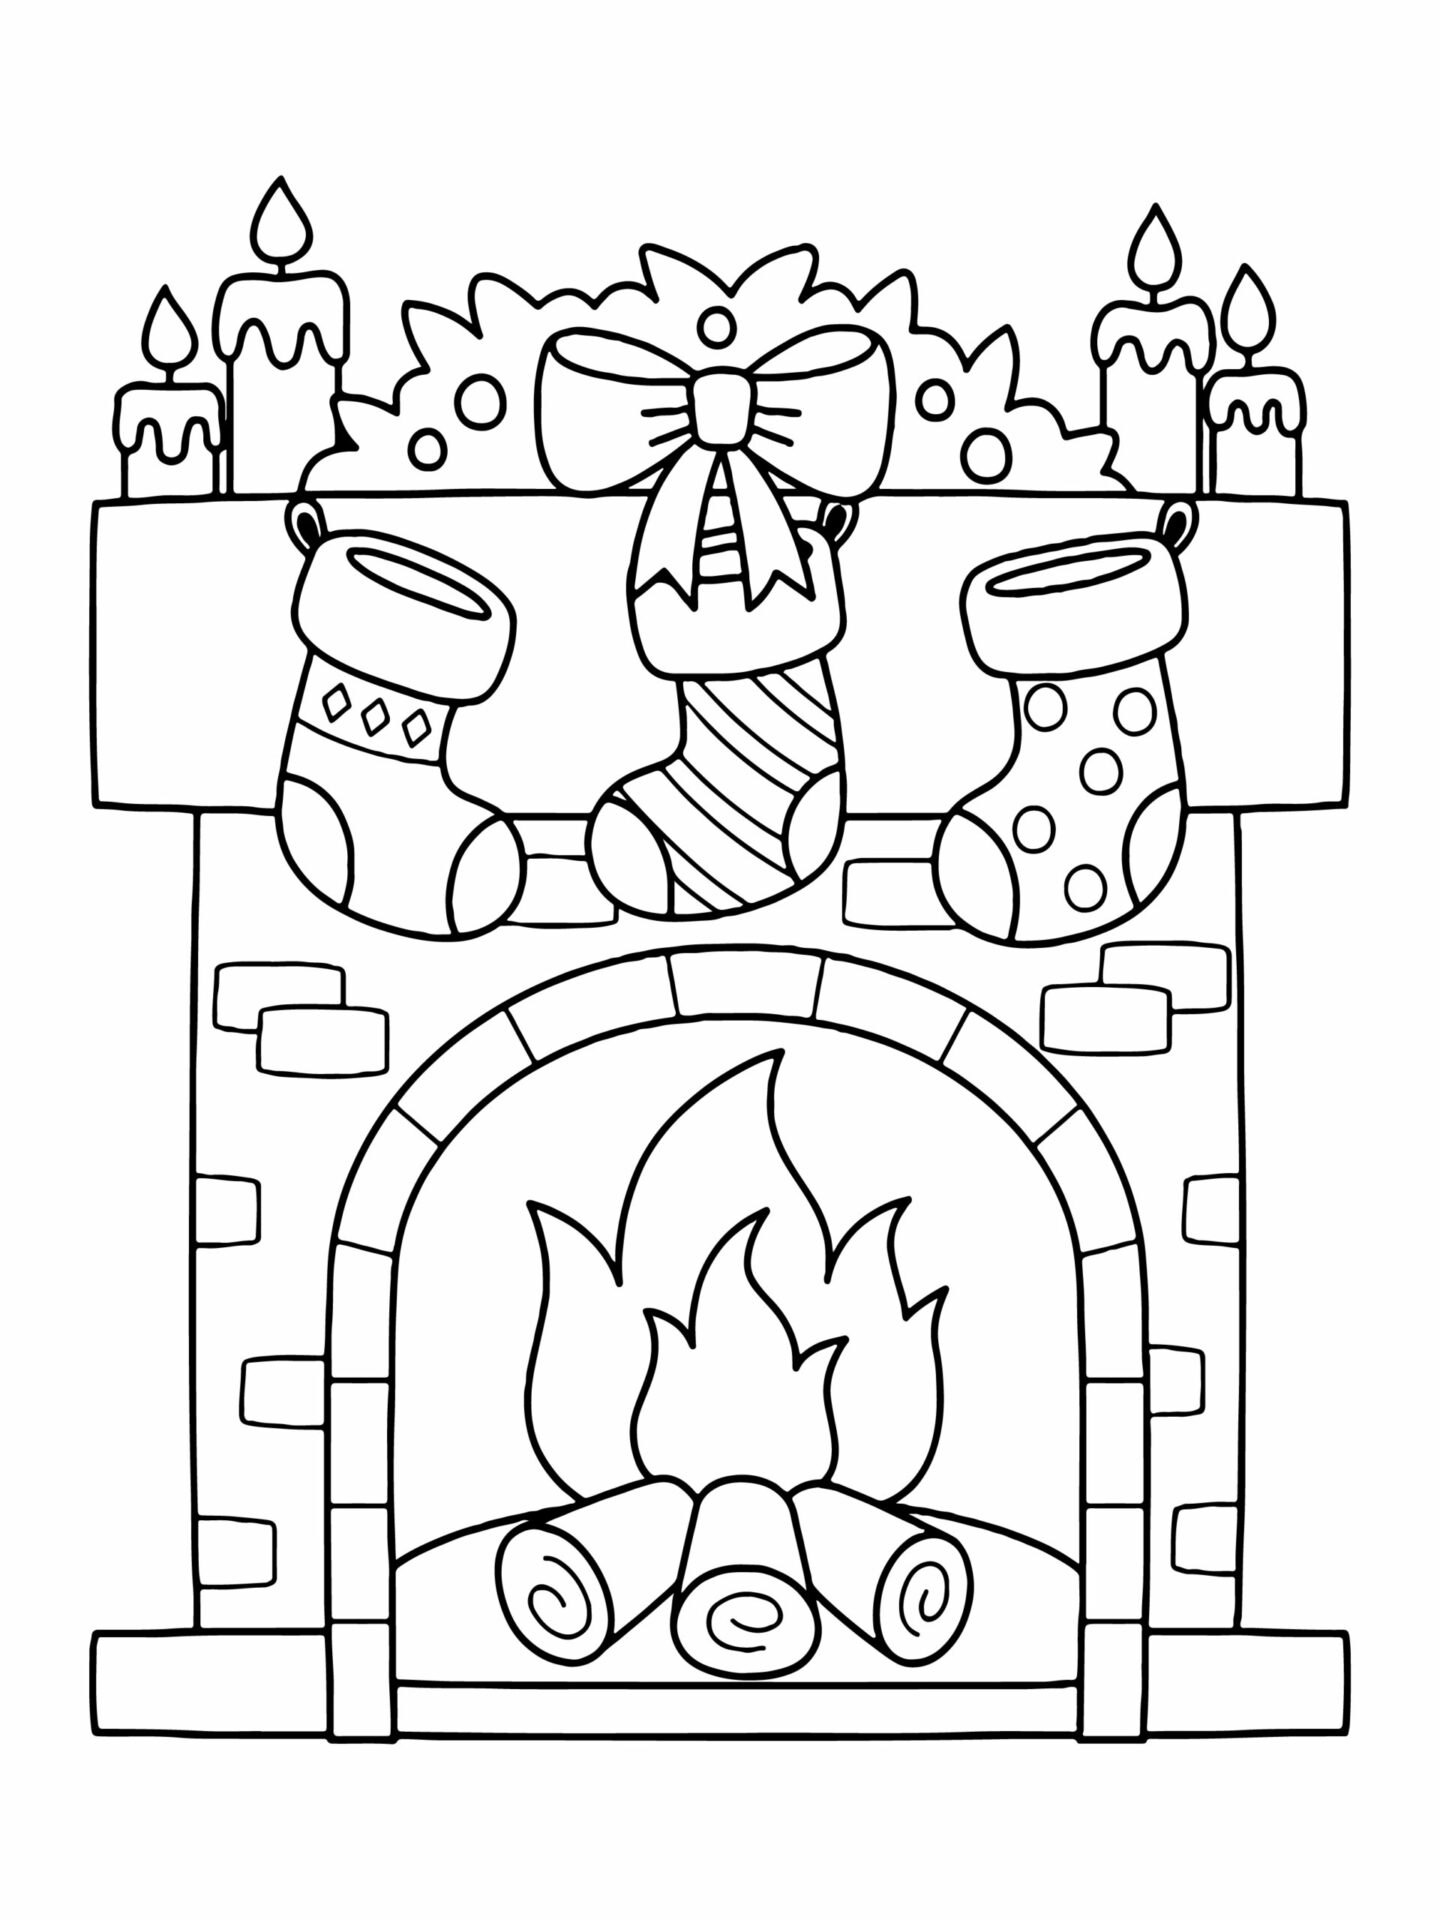 righteous Christmas Coloring Page - Free Printable Coloring Pages for Kids